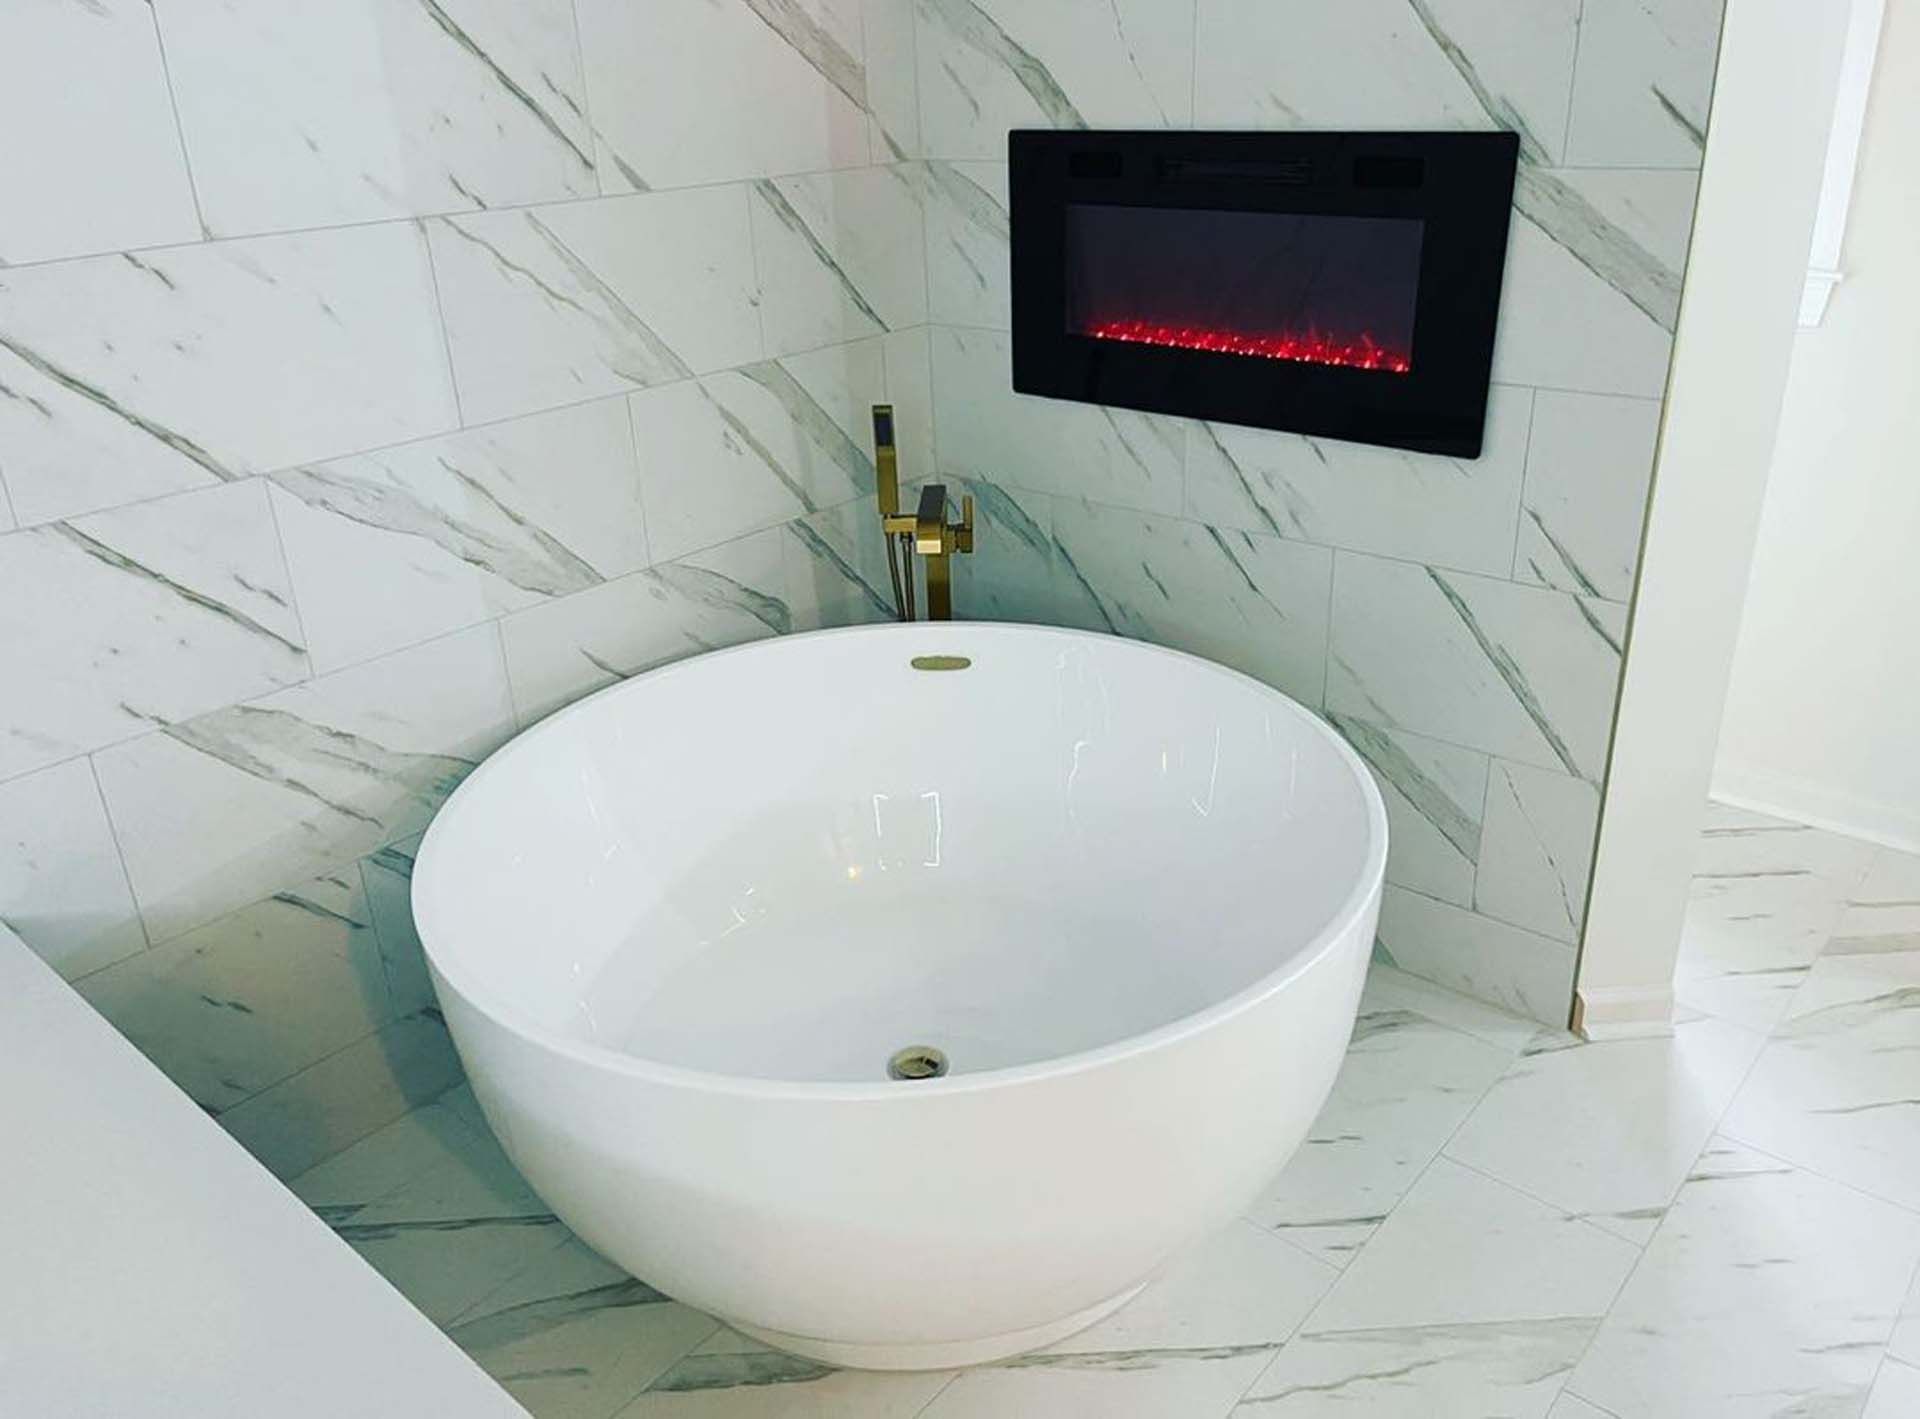 A white bathtub in a bathroom next to a fireplace.